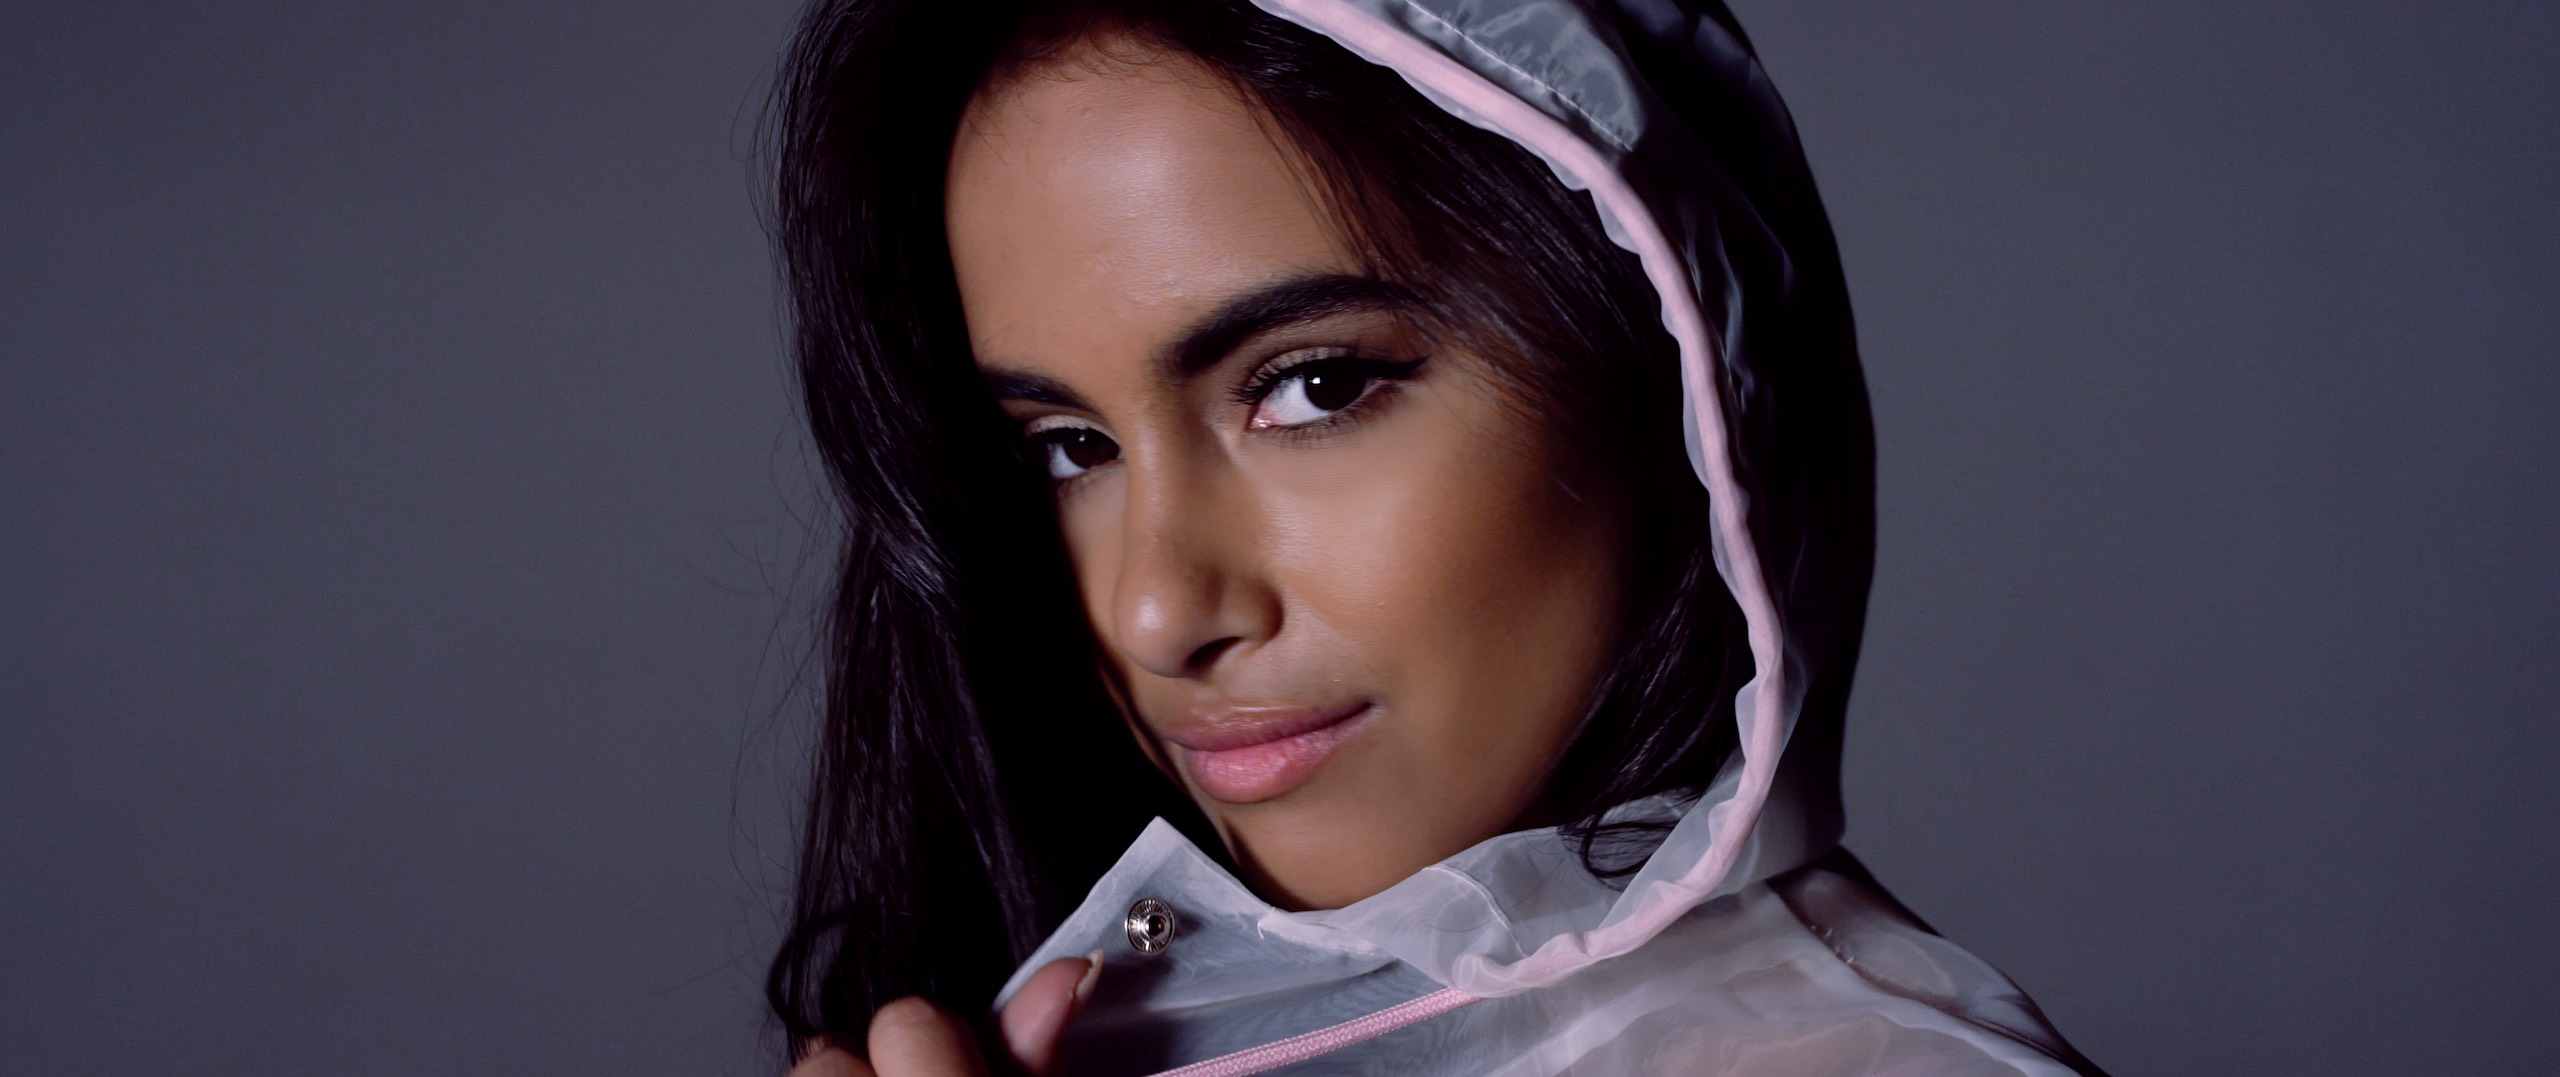 The Dailies Episode 202 BTS Footage with closeup headshot of Mercedes Gutierrez wearing a pink and white rain coat